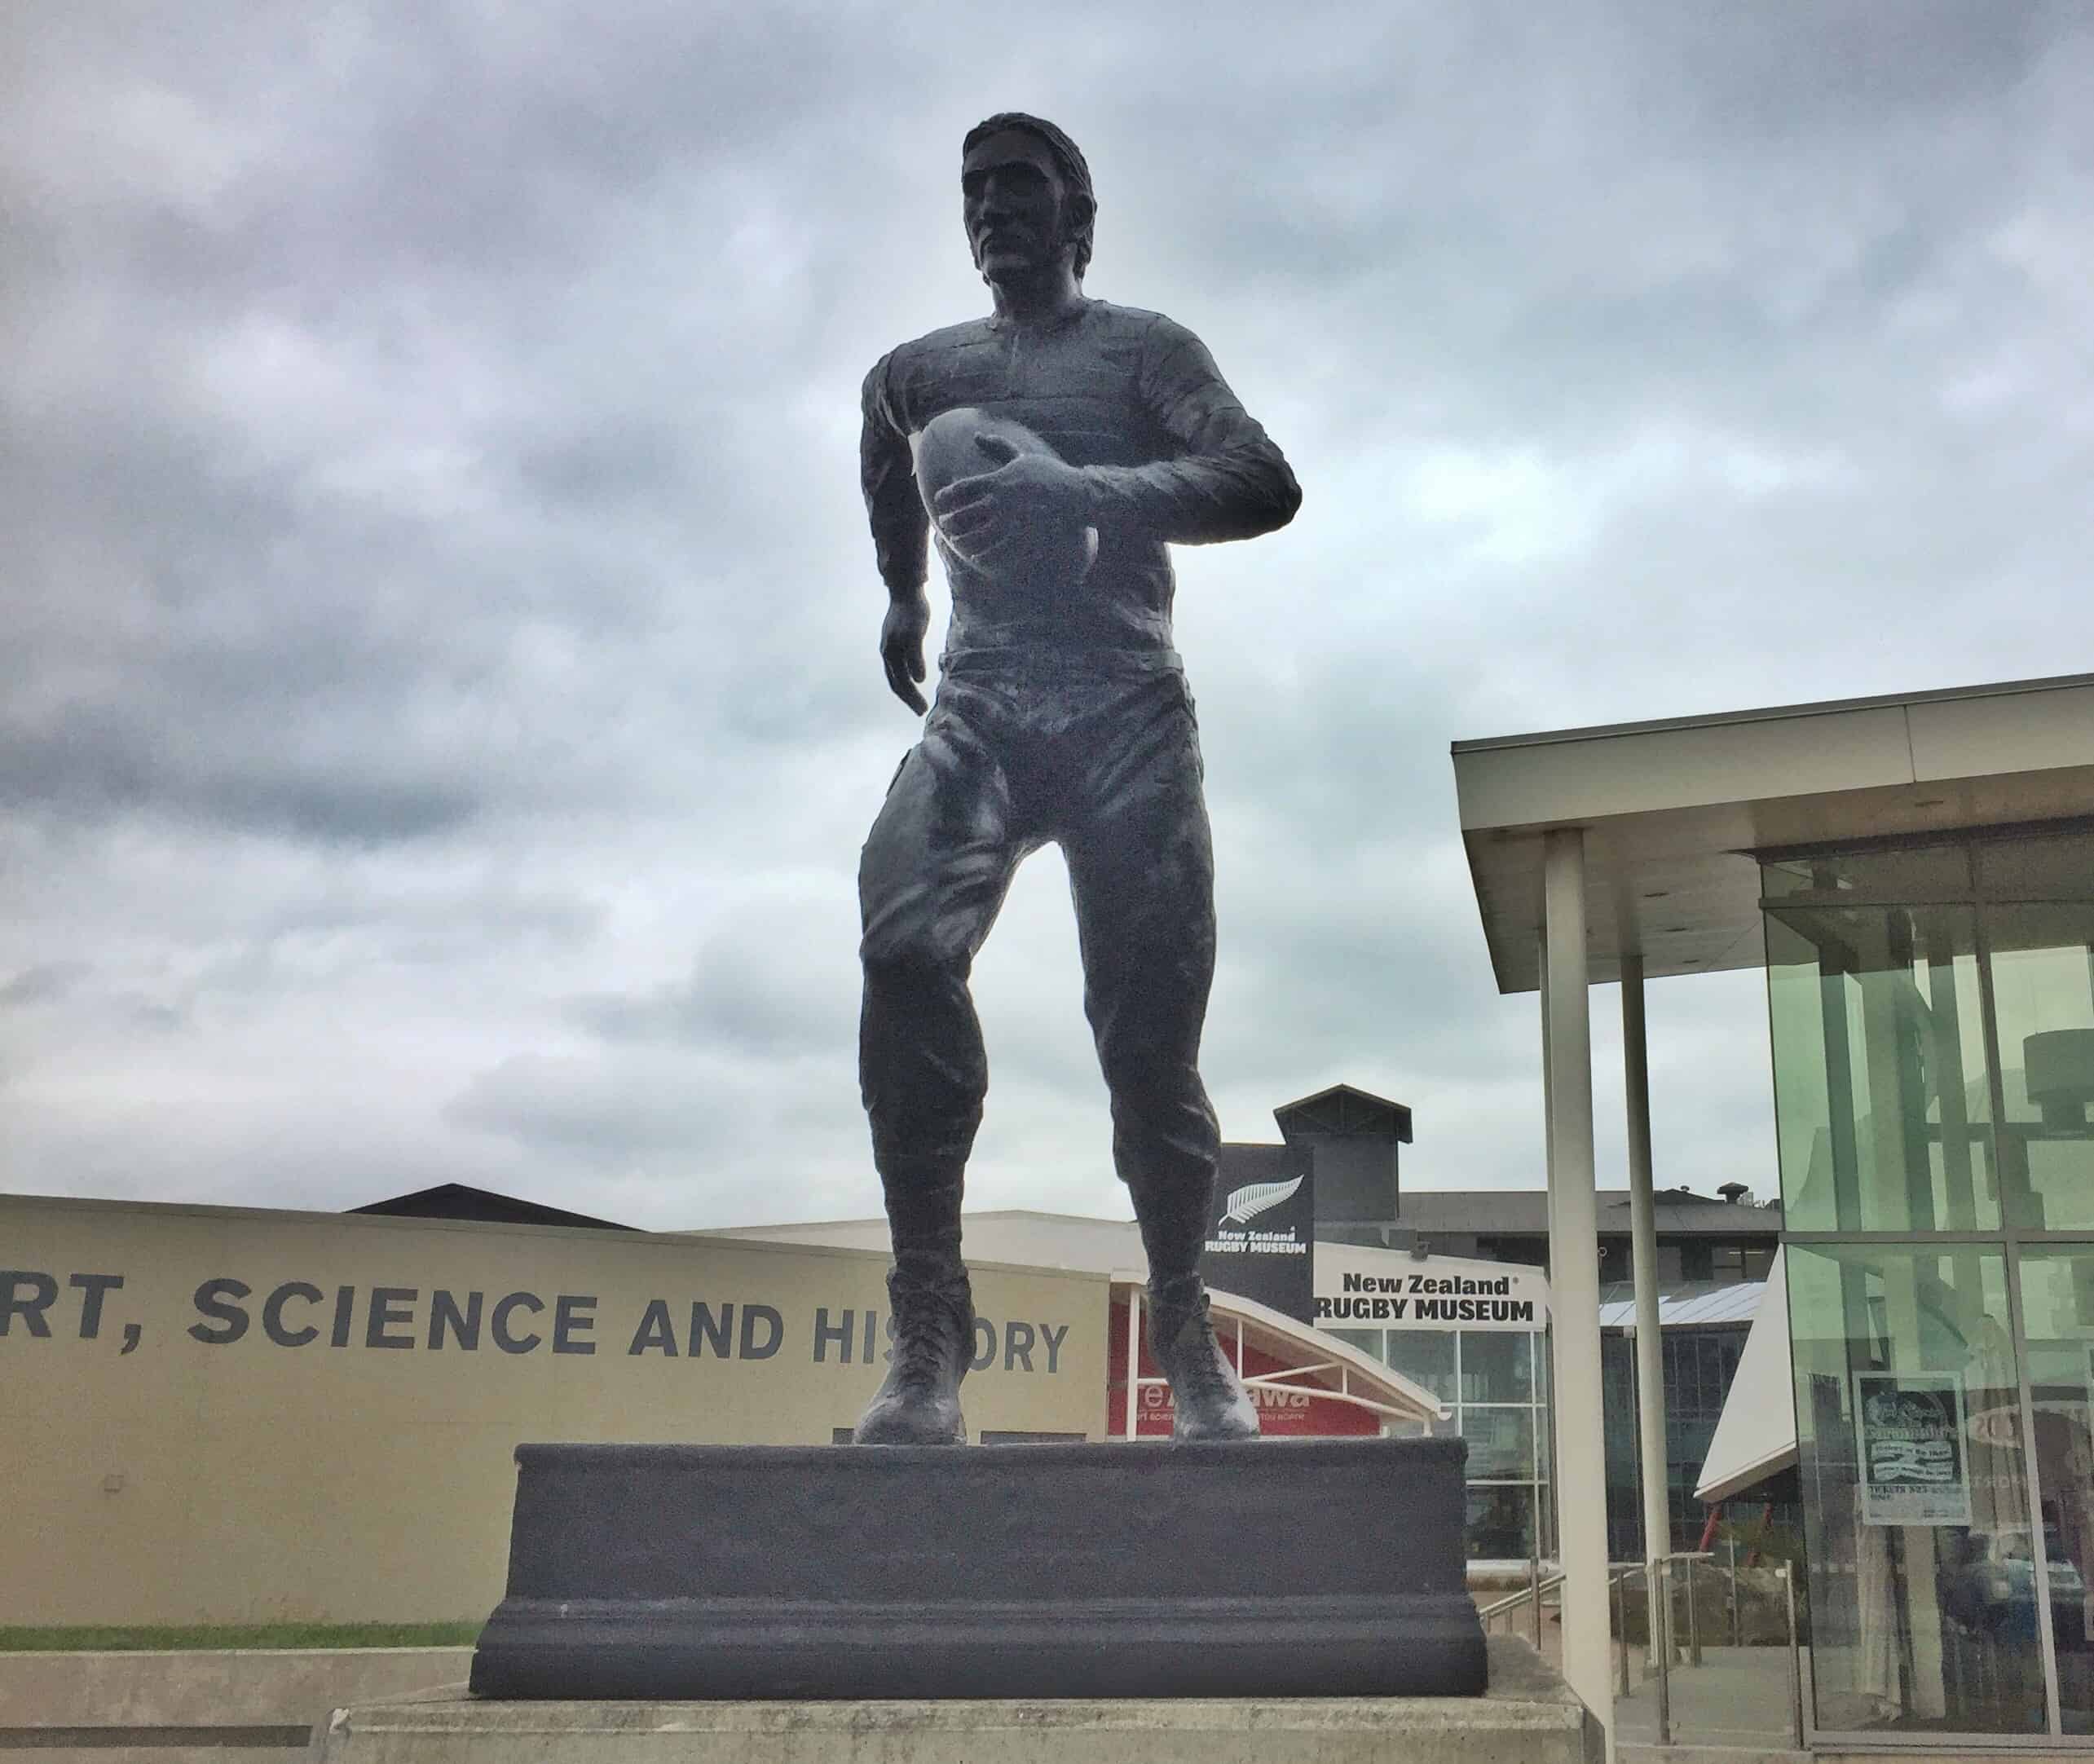 a statue of charles munro running with a rugby ball in front of the New Zealand rugby museum building